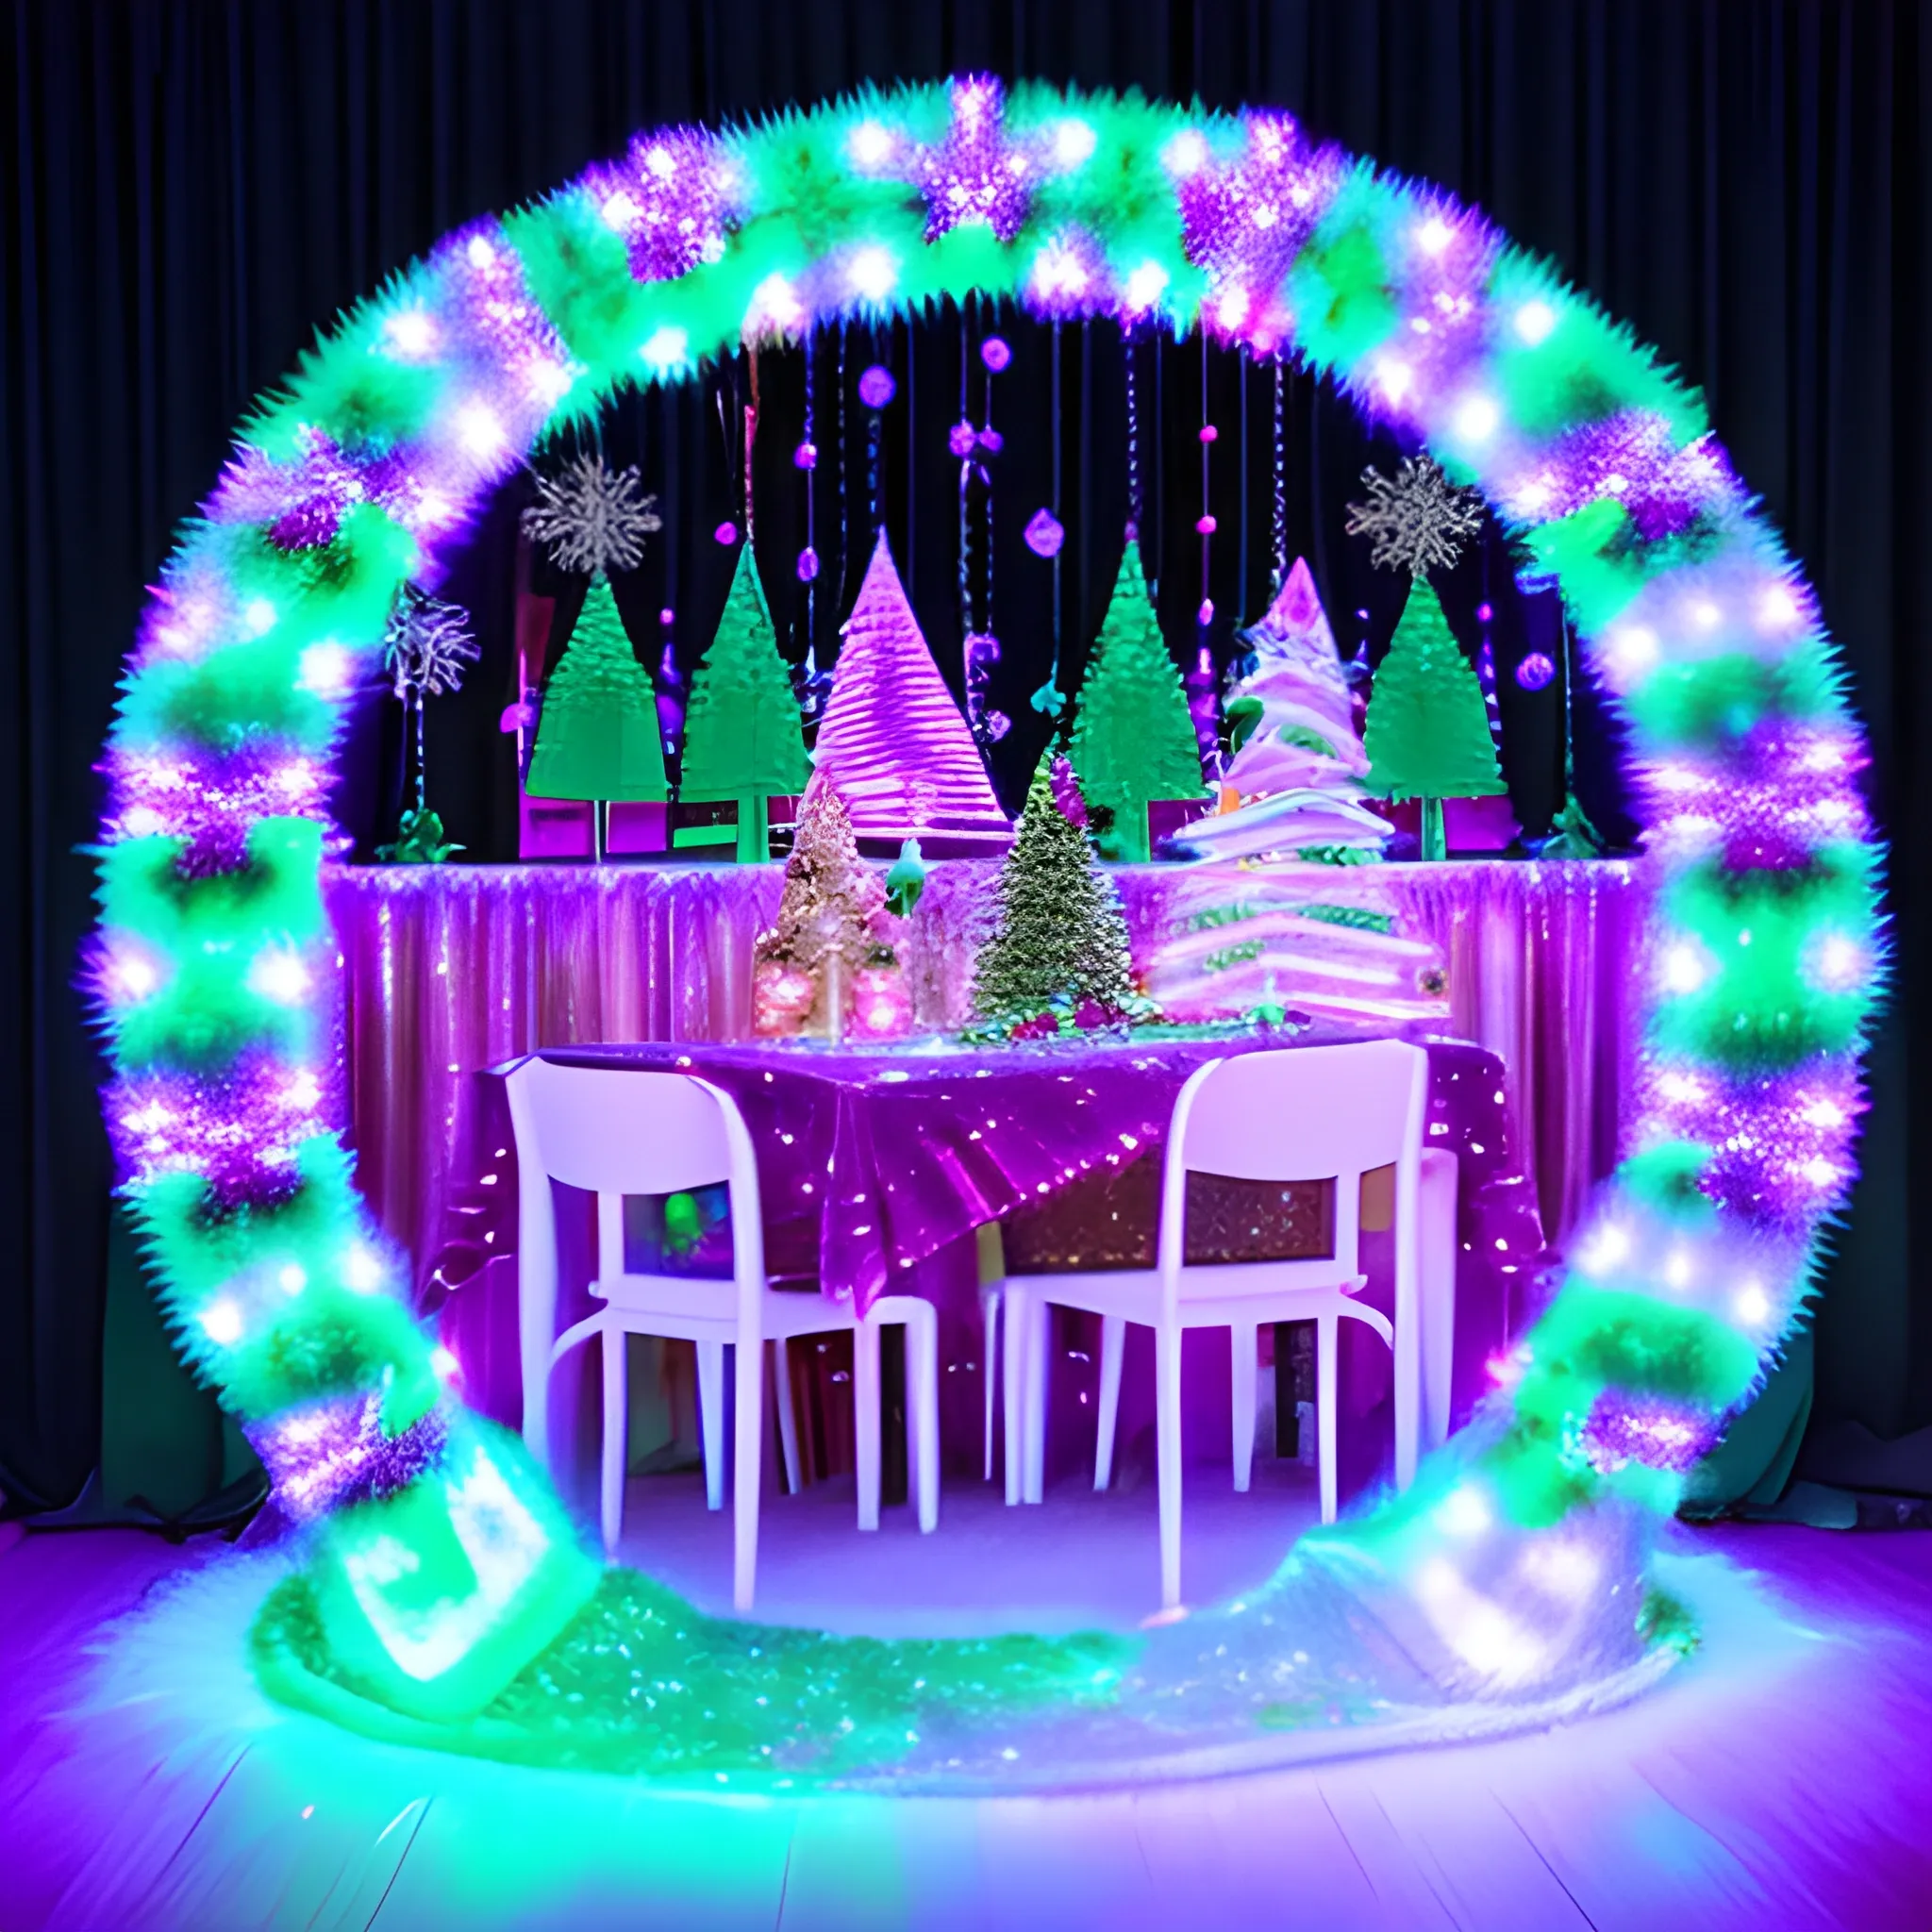 Liminal space disco with christmas decorations